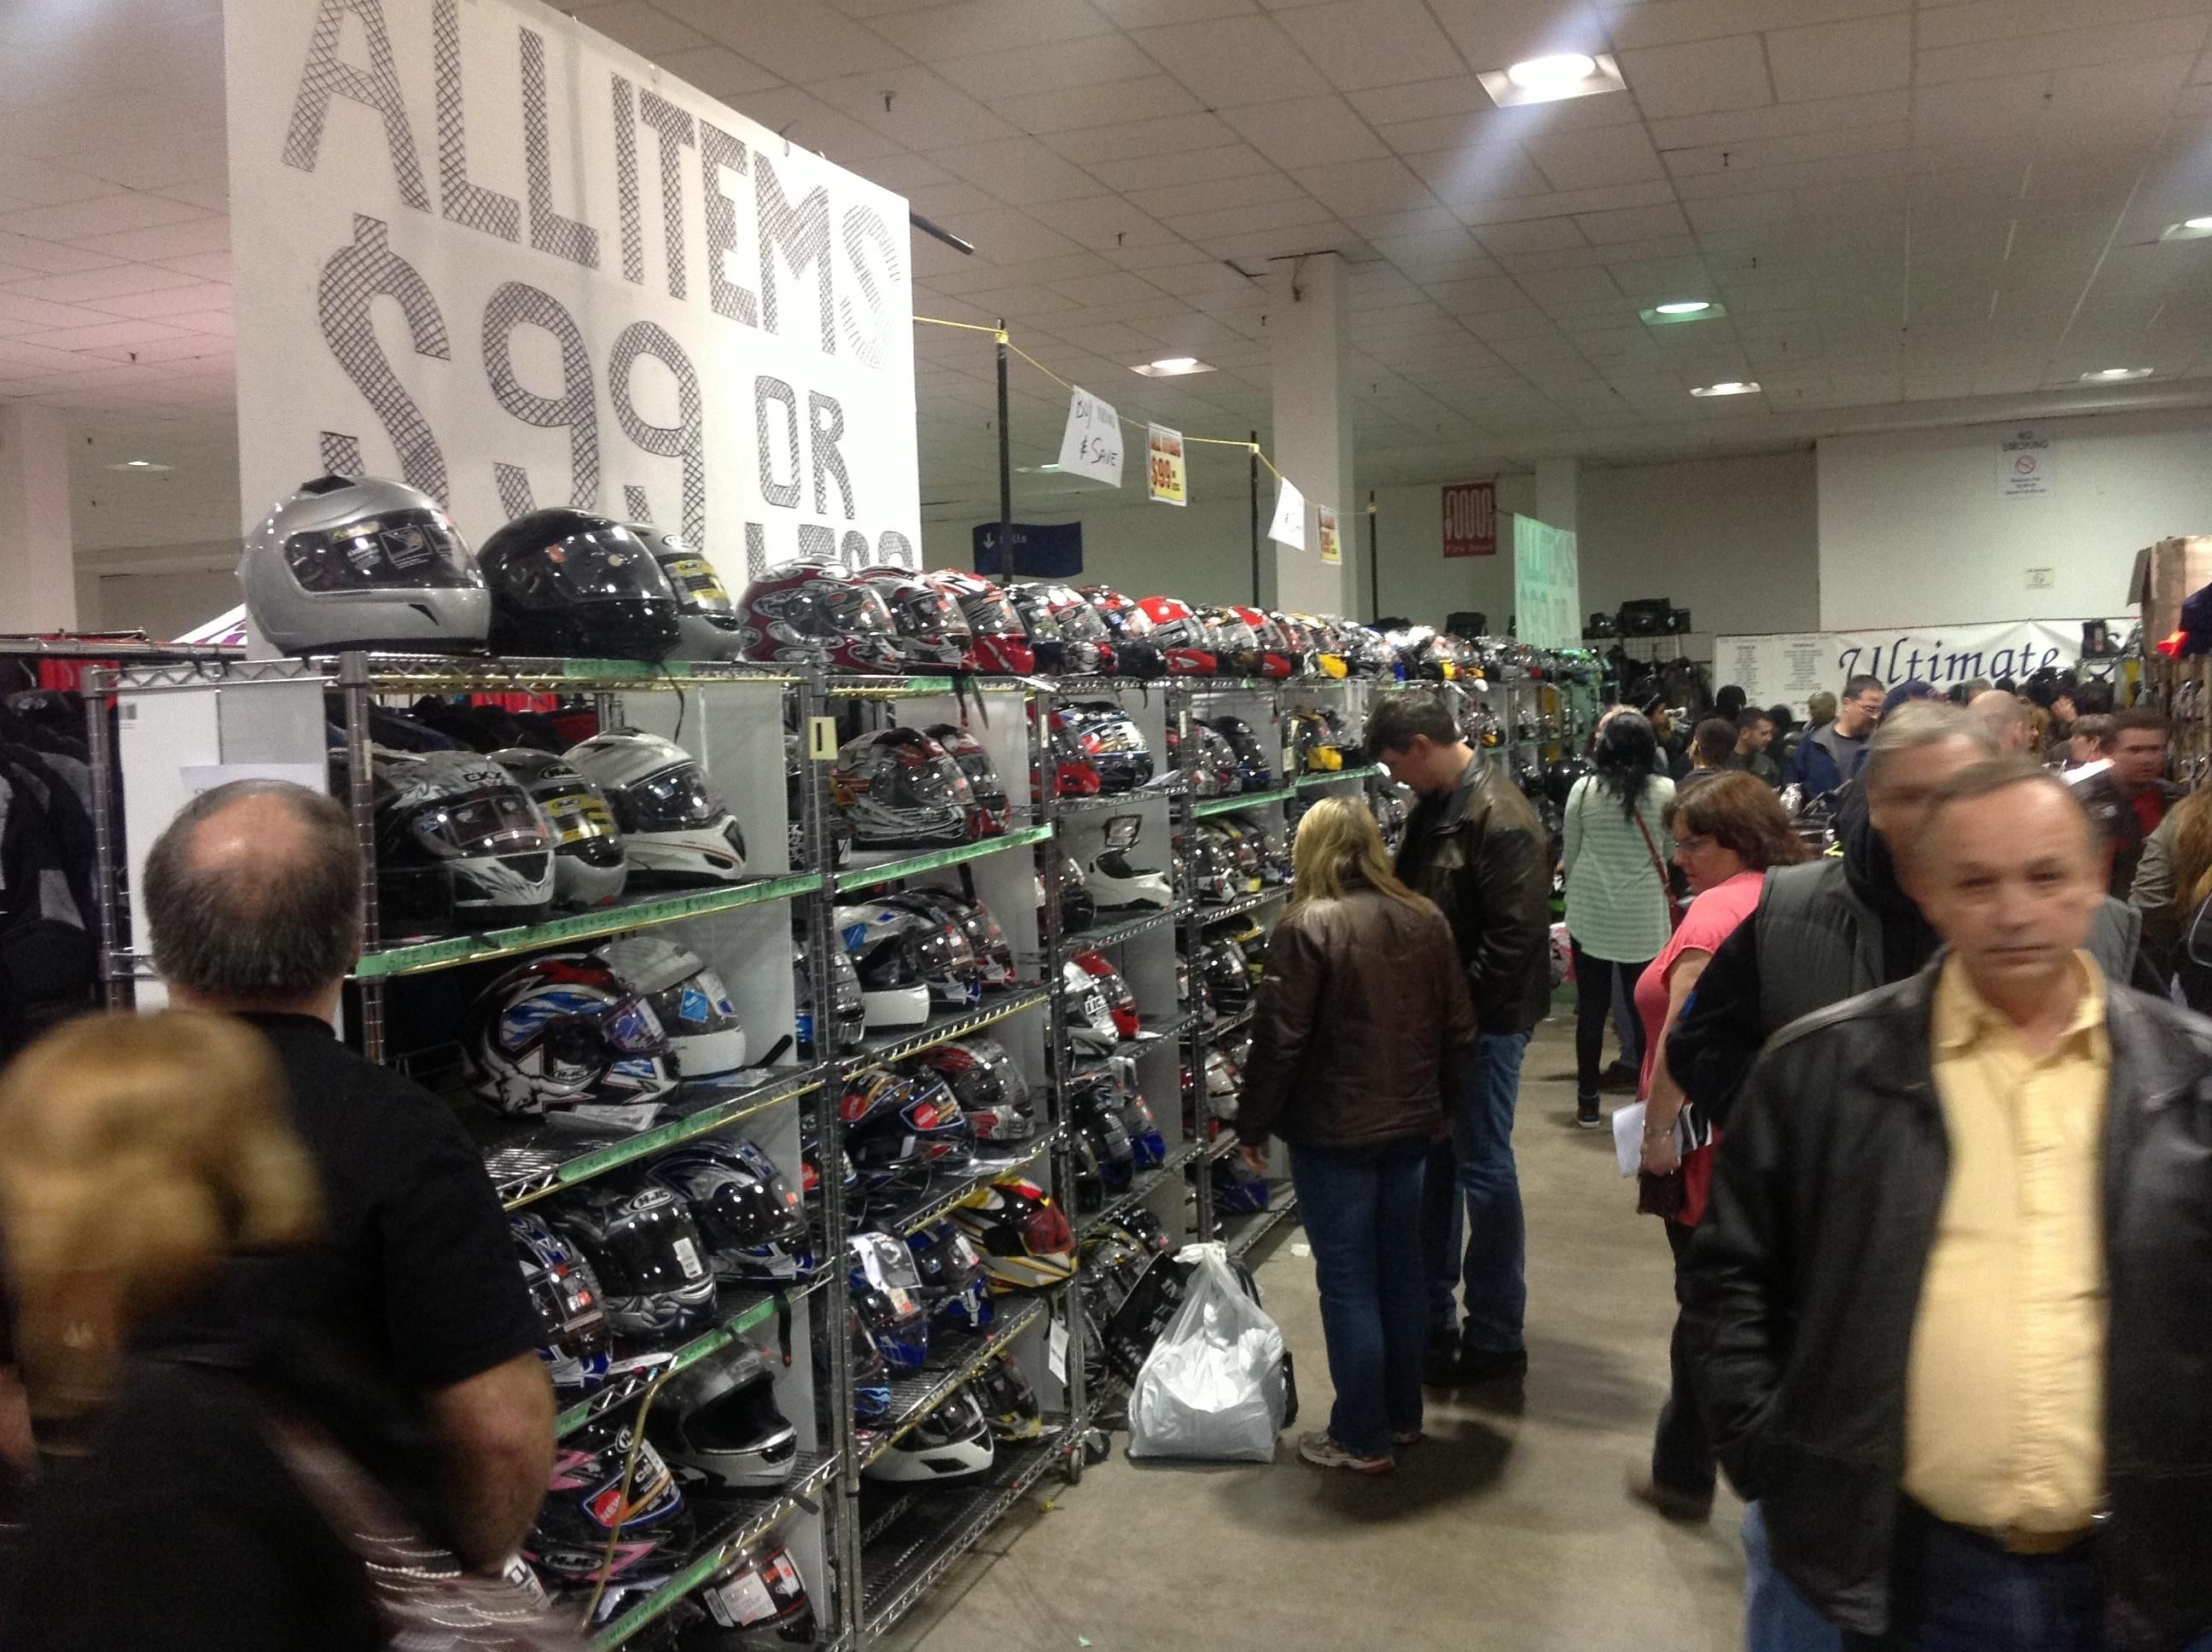 Lots of gear for sale at Motorcycle Spring Show